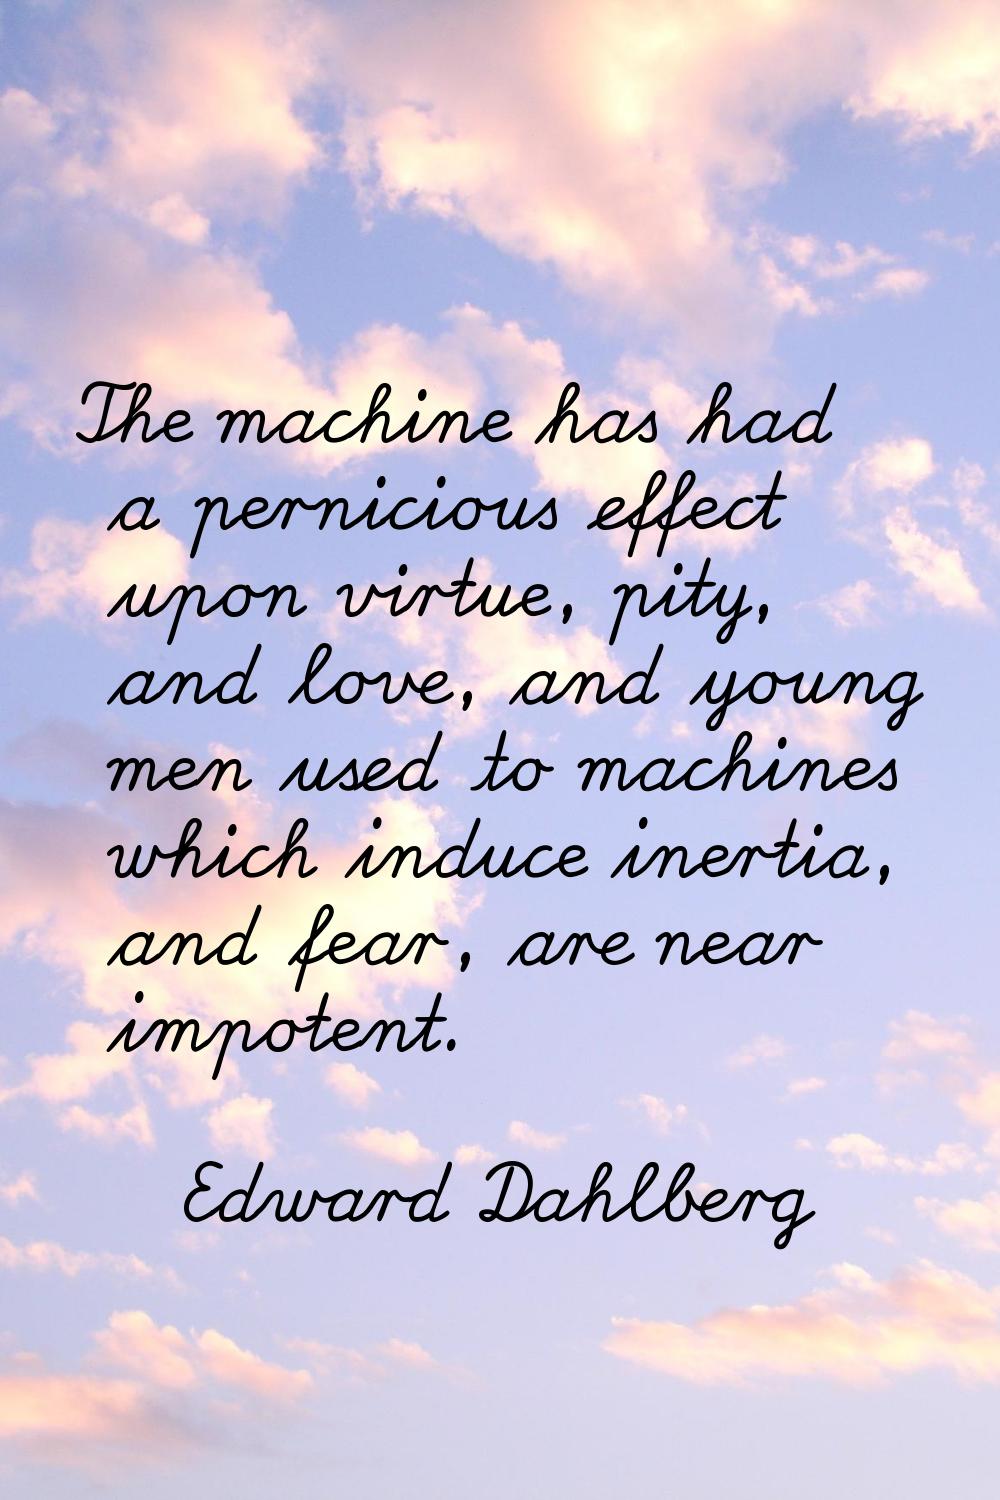 The machine has had a pernicious effect upon virtue, pity, and love, and young men used to machines